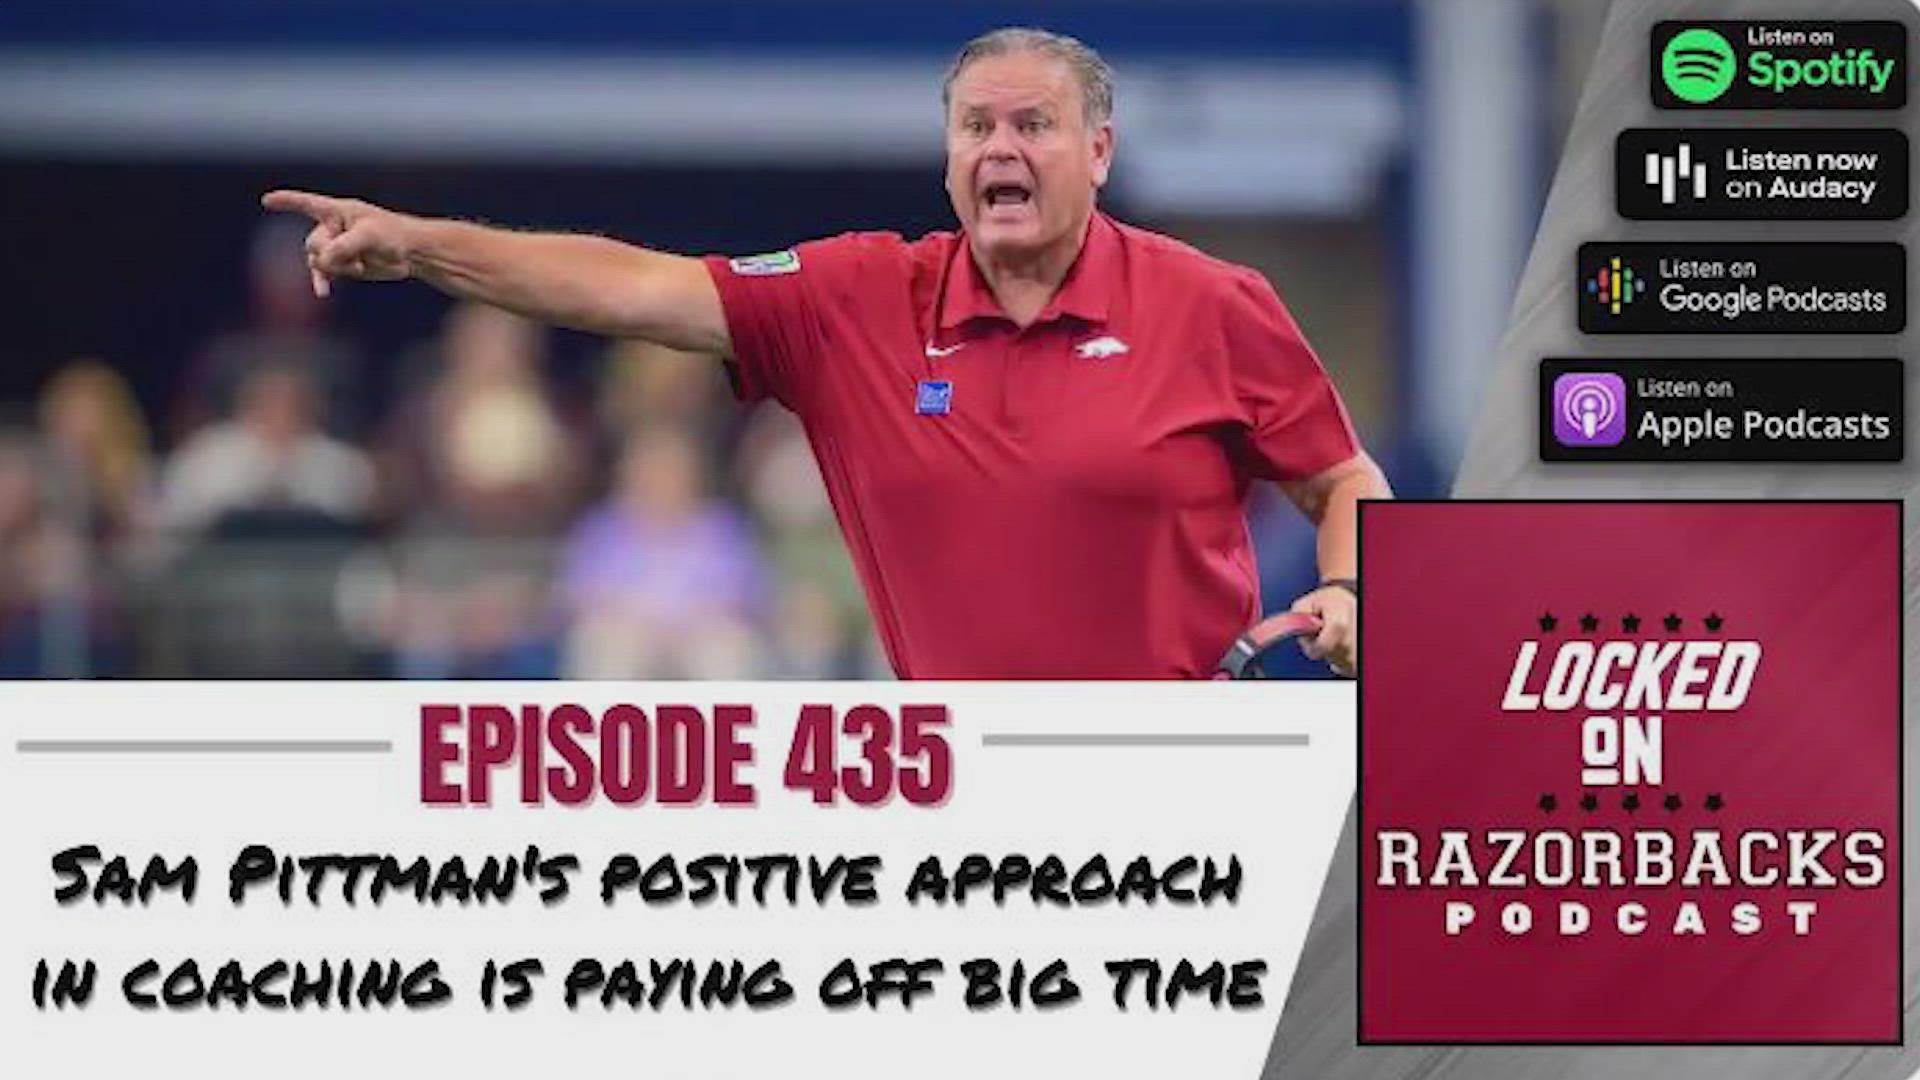 In this podcast, Nabors breaks down Sam Pittman’s positive approach to coaching and numbers to help Hog fans feel like they could upset Georgia.